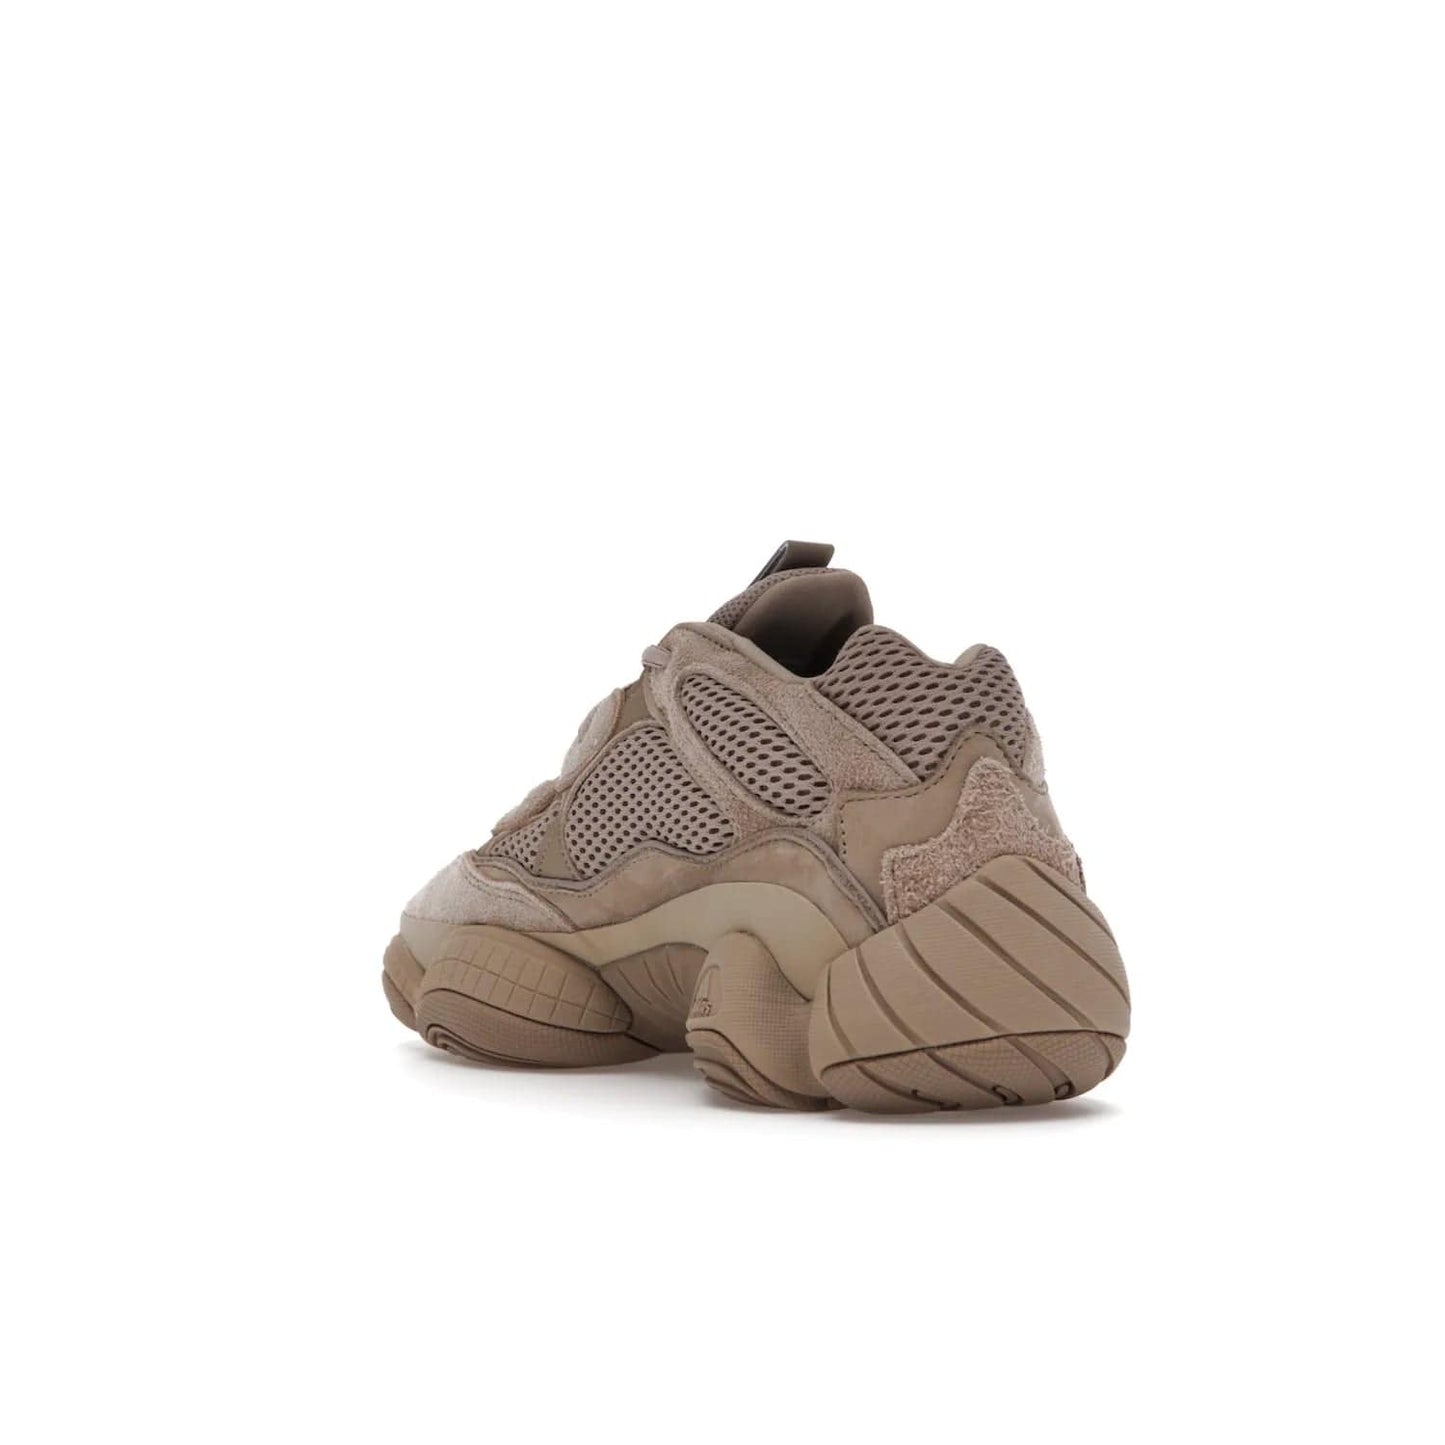 adidas Yeezy 500 Taupe Light - Image 25 - Only at www.BallersClubKickz.com - The adidas Yeezy 500 Taupe Light combines mesh, leather, and suede, with a durable adiPRENE sole for an eye-catching accessory. Reflective piping adds the perfect finishing touches to this unique silhouette. Ideal for any wardrobe, releasing in June 2021.